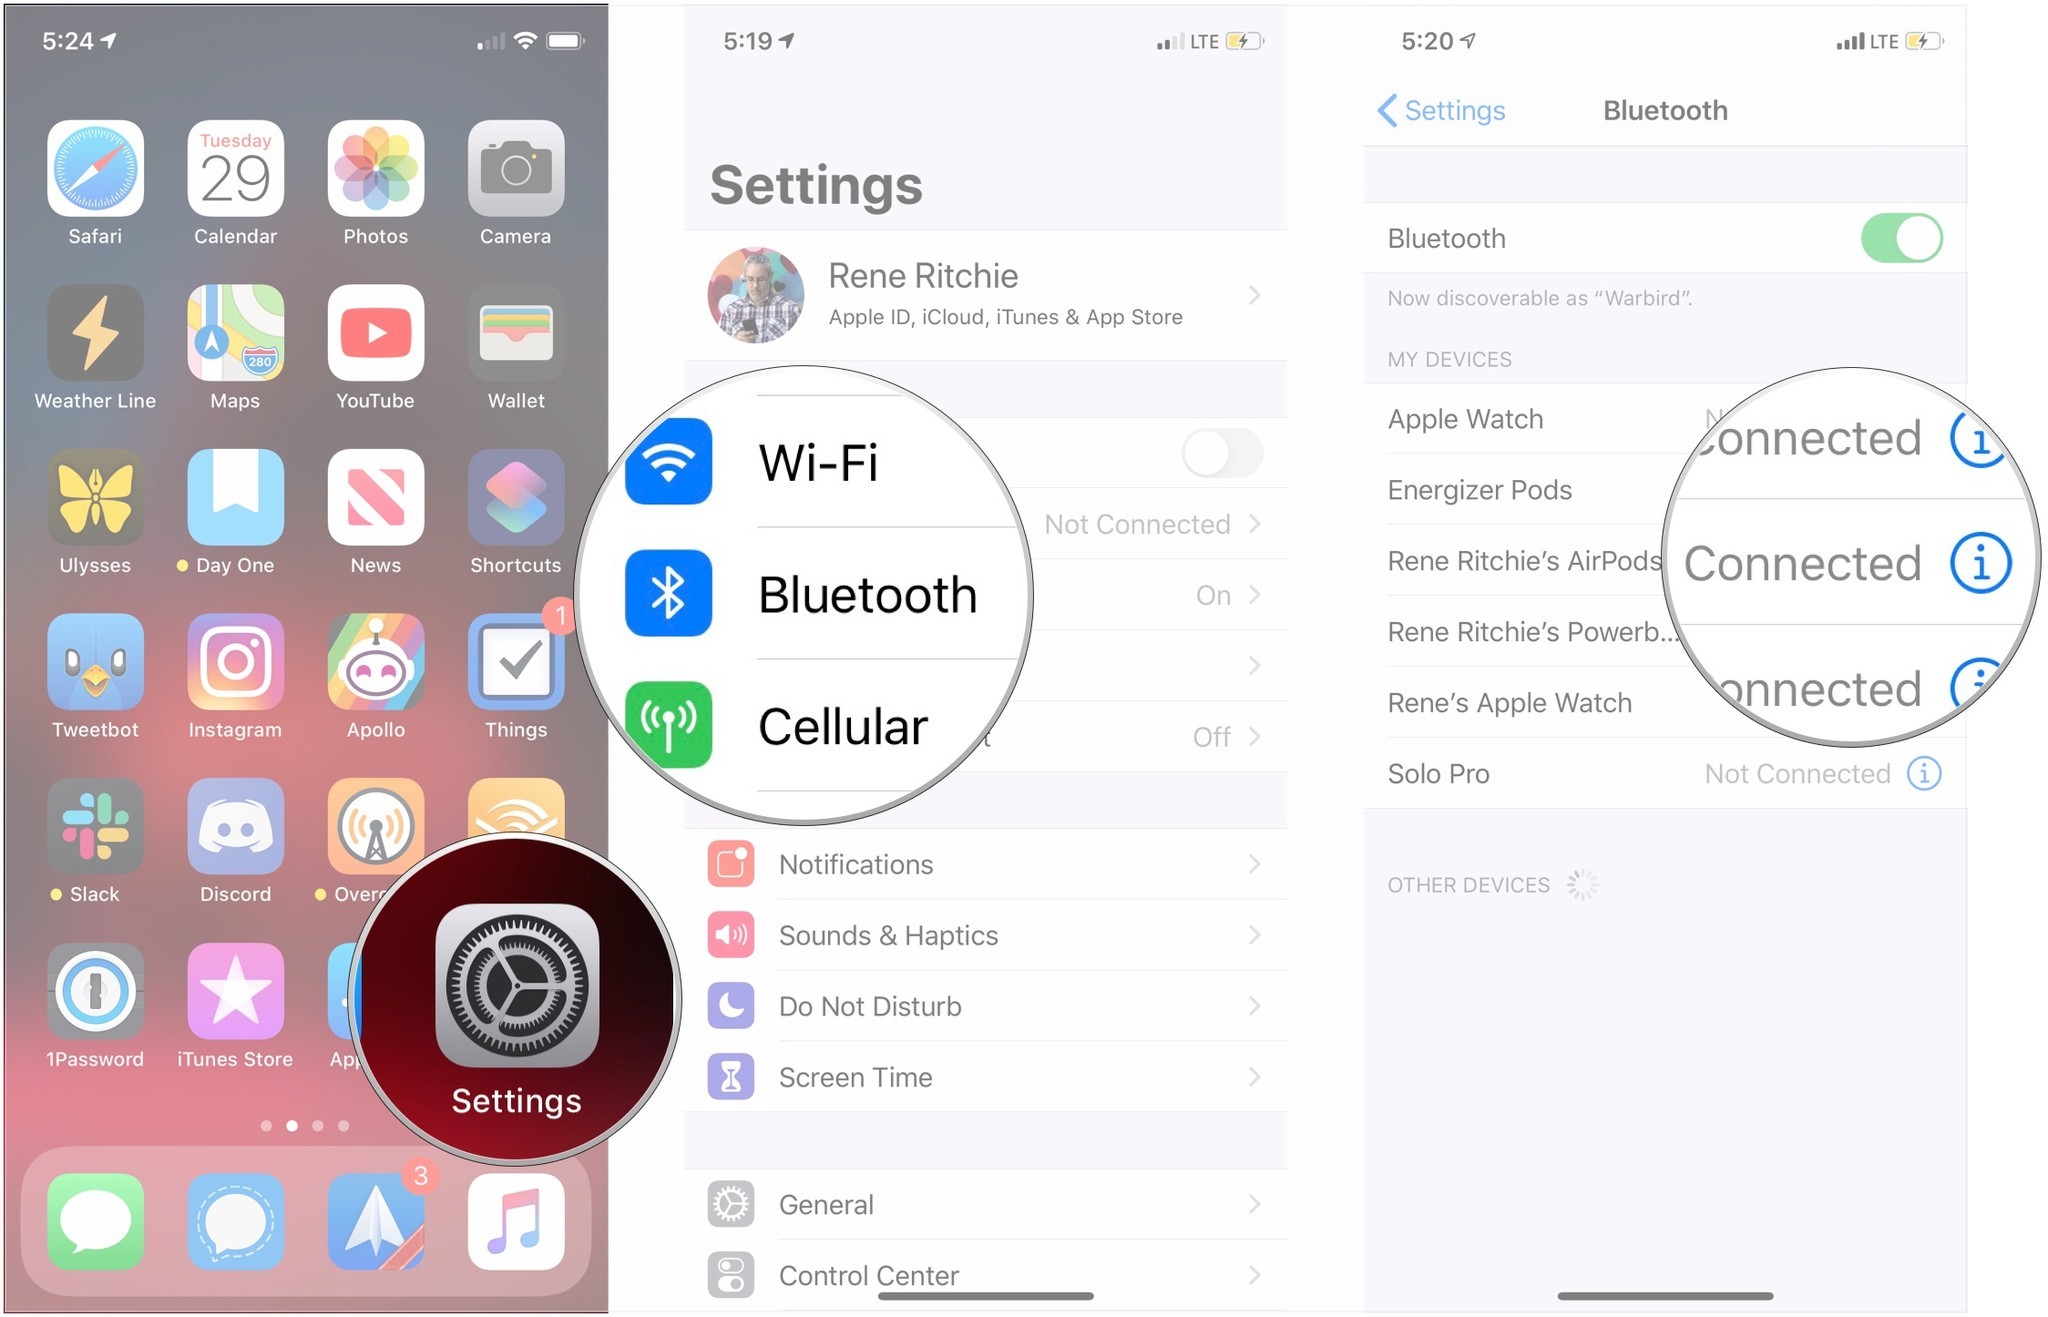 Open Settings, Tap Bluetooth, tap i